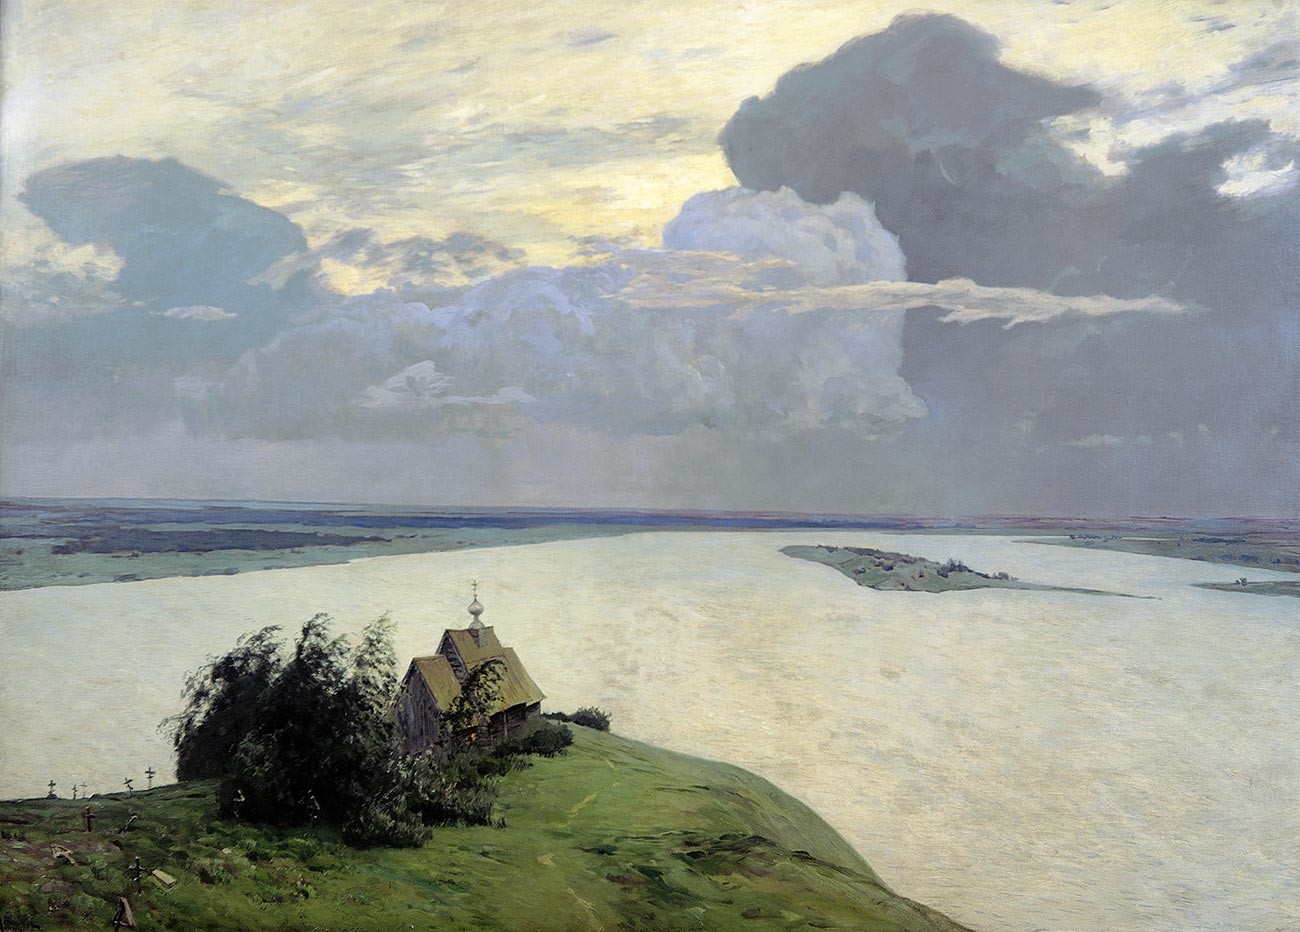 Over Eternal Peace, one of the most 'Russian' landscape